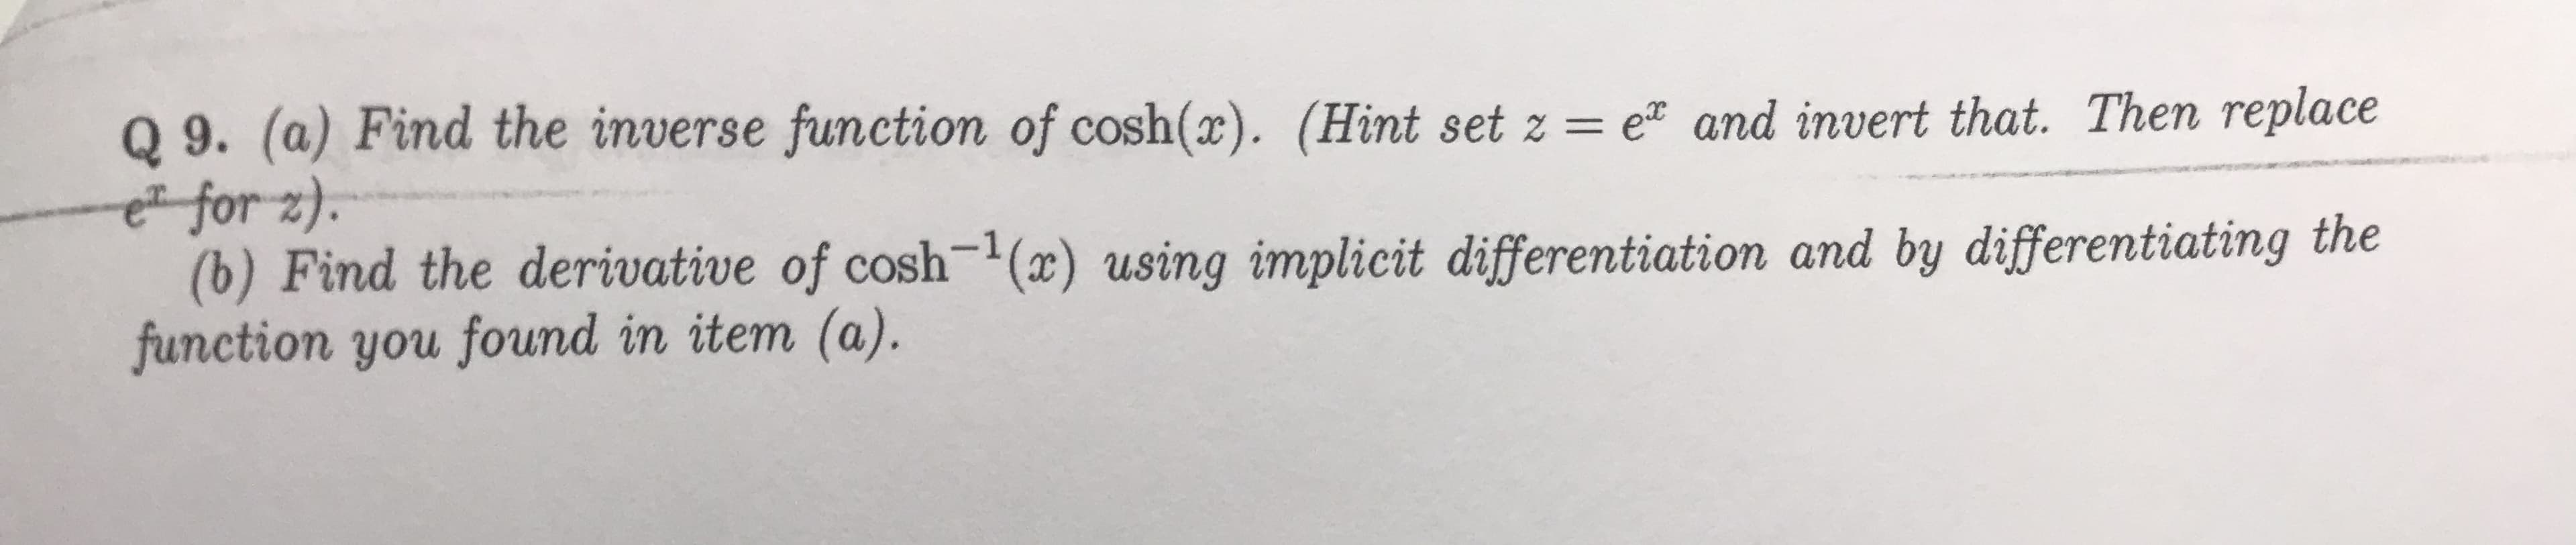 Q 9. (a) Find the inverse function of cosh(x). (Hint set z = e and invert that. Then replace
e for z).
(b) Find the derivative of cosh1 (x) using implicit differentiation and by differentiating the
function you found in item (a).
